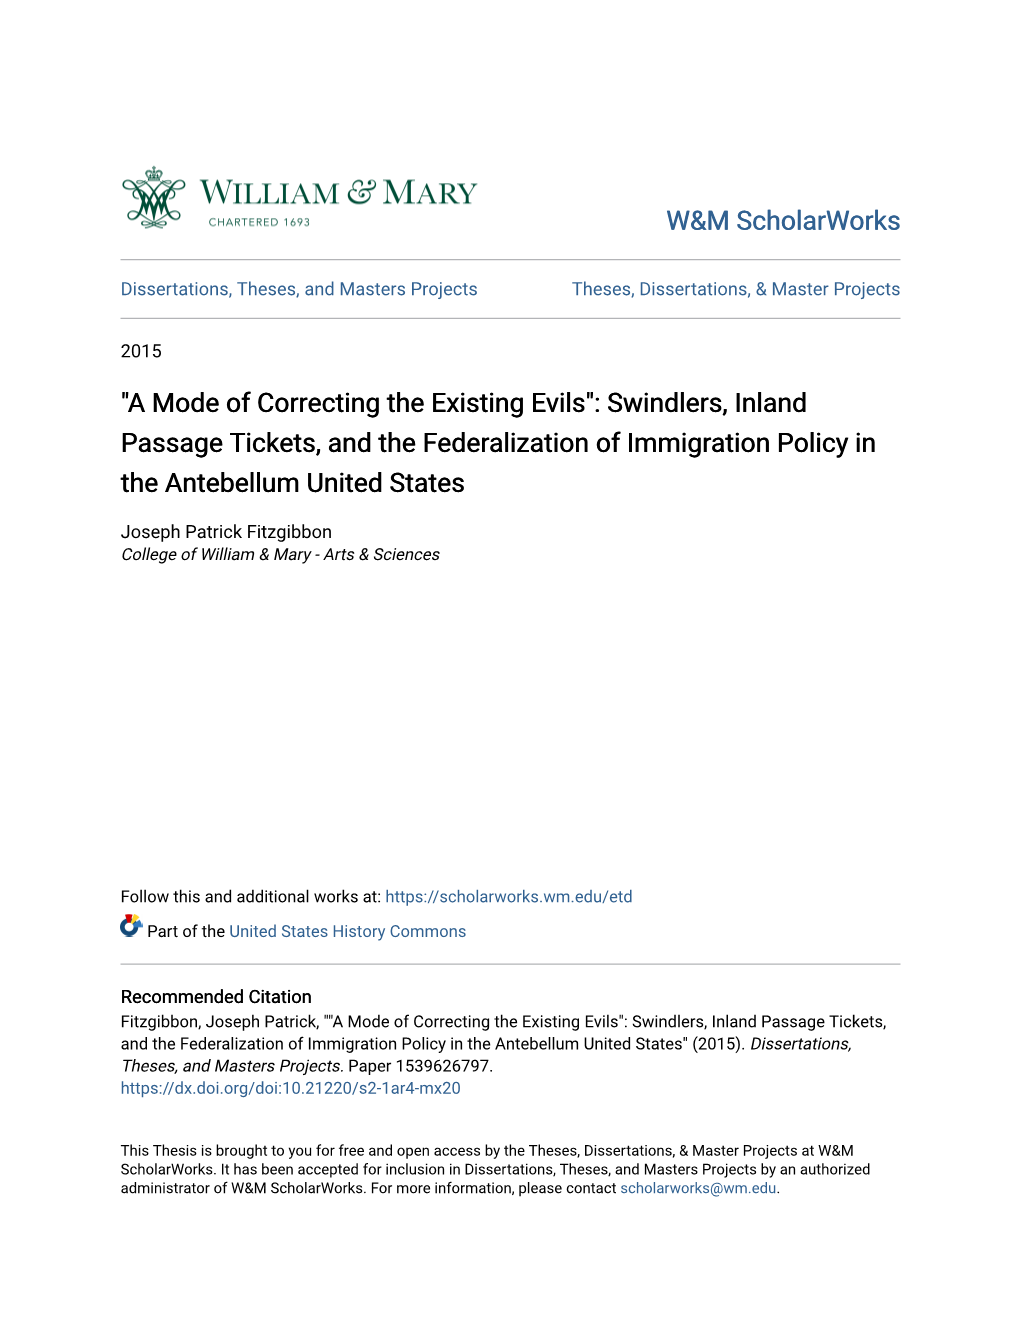 Swindlers, Inland Passage Tickets, and the Federalization of Immigration Policy in the Antebellum United States